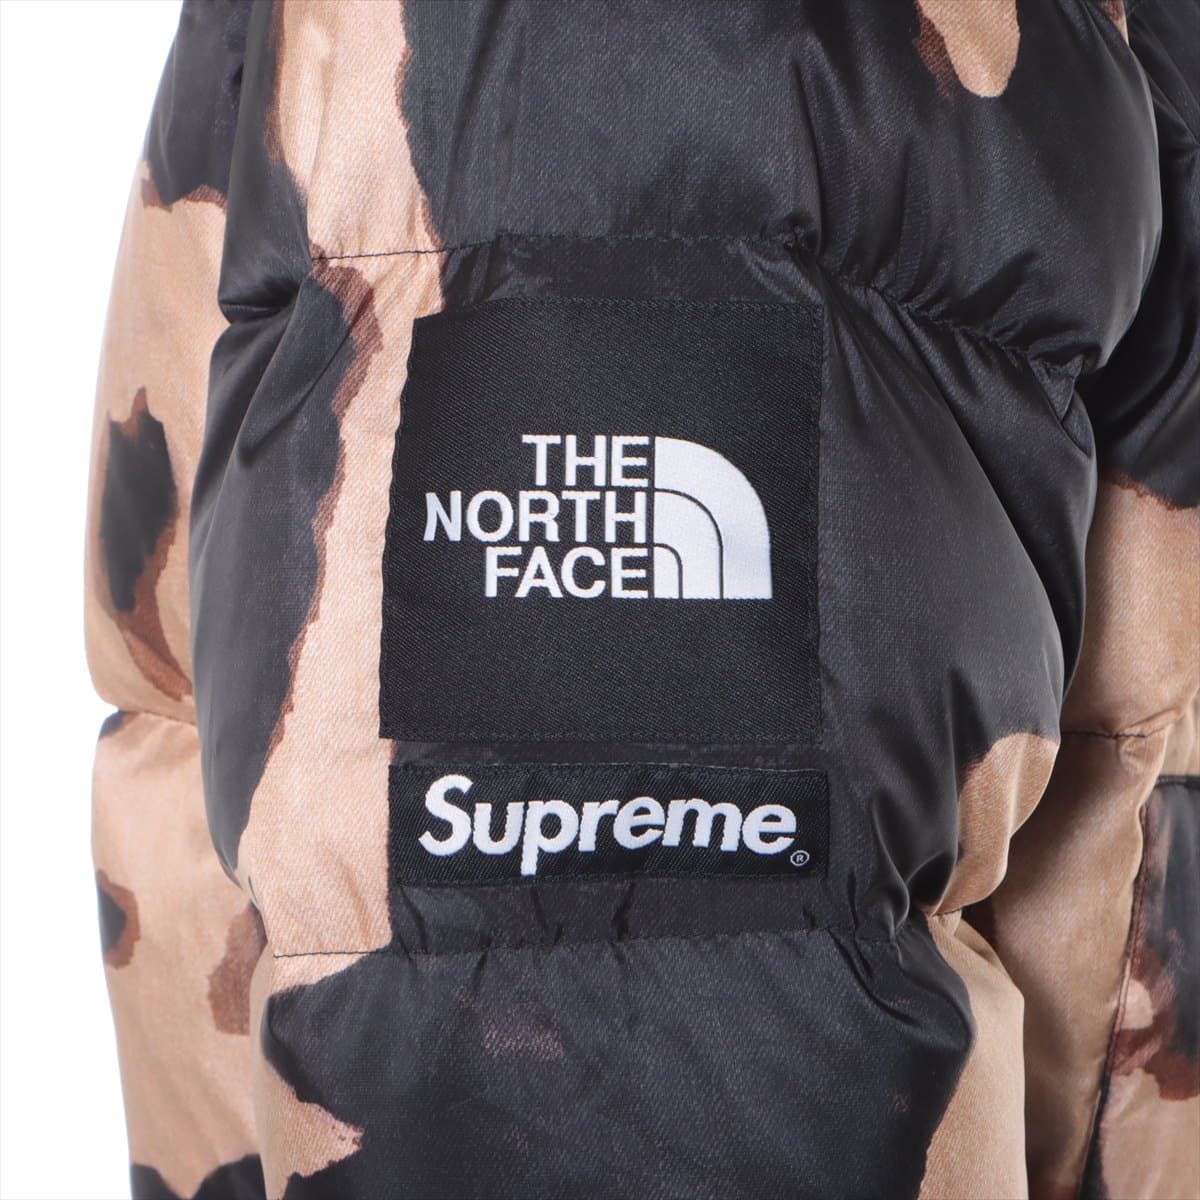 SUPREME × THE NORTH FACE 21AW Nylon Down jacket M Men's Black × Brown  ND521001 Tie-dye Bleached Denim Print Nuptse Jacket Can be stored in the hood